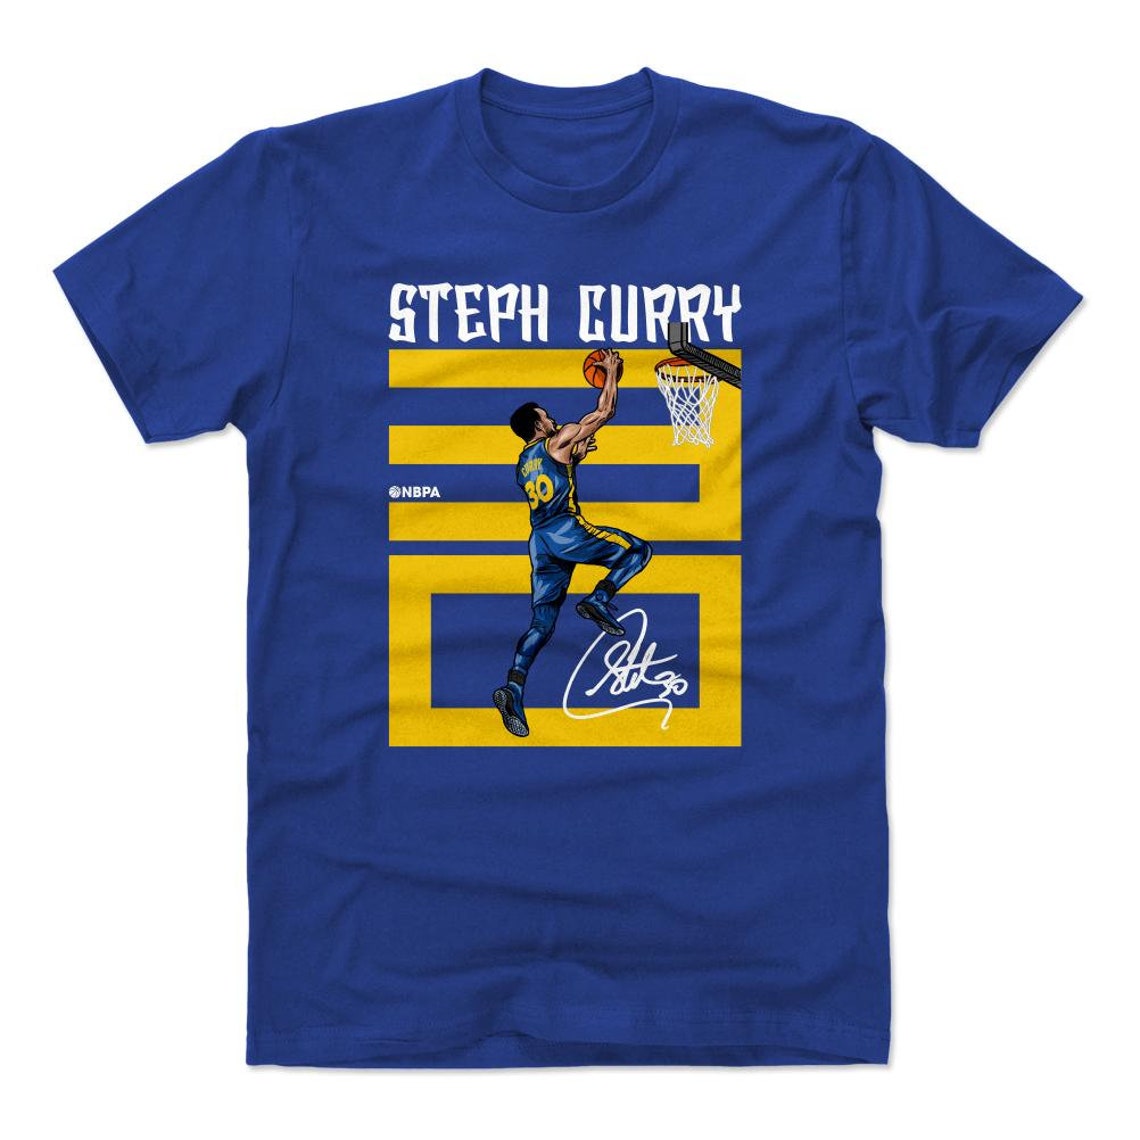 Steph Curry Men's Cotton T-shirt Golden State Basketball - Etsy